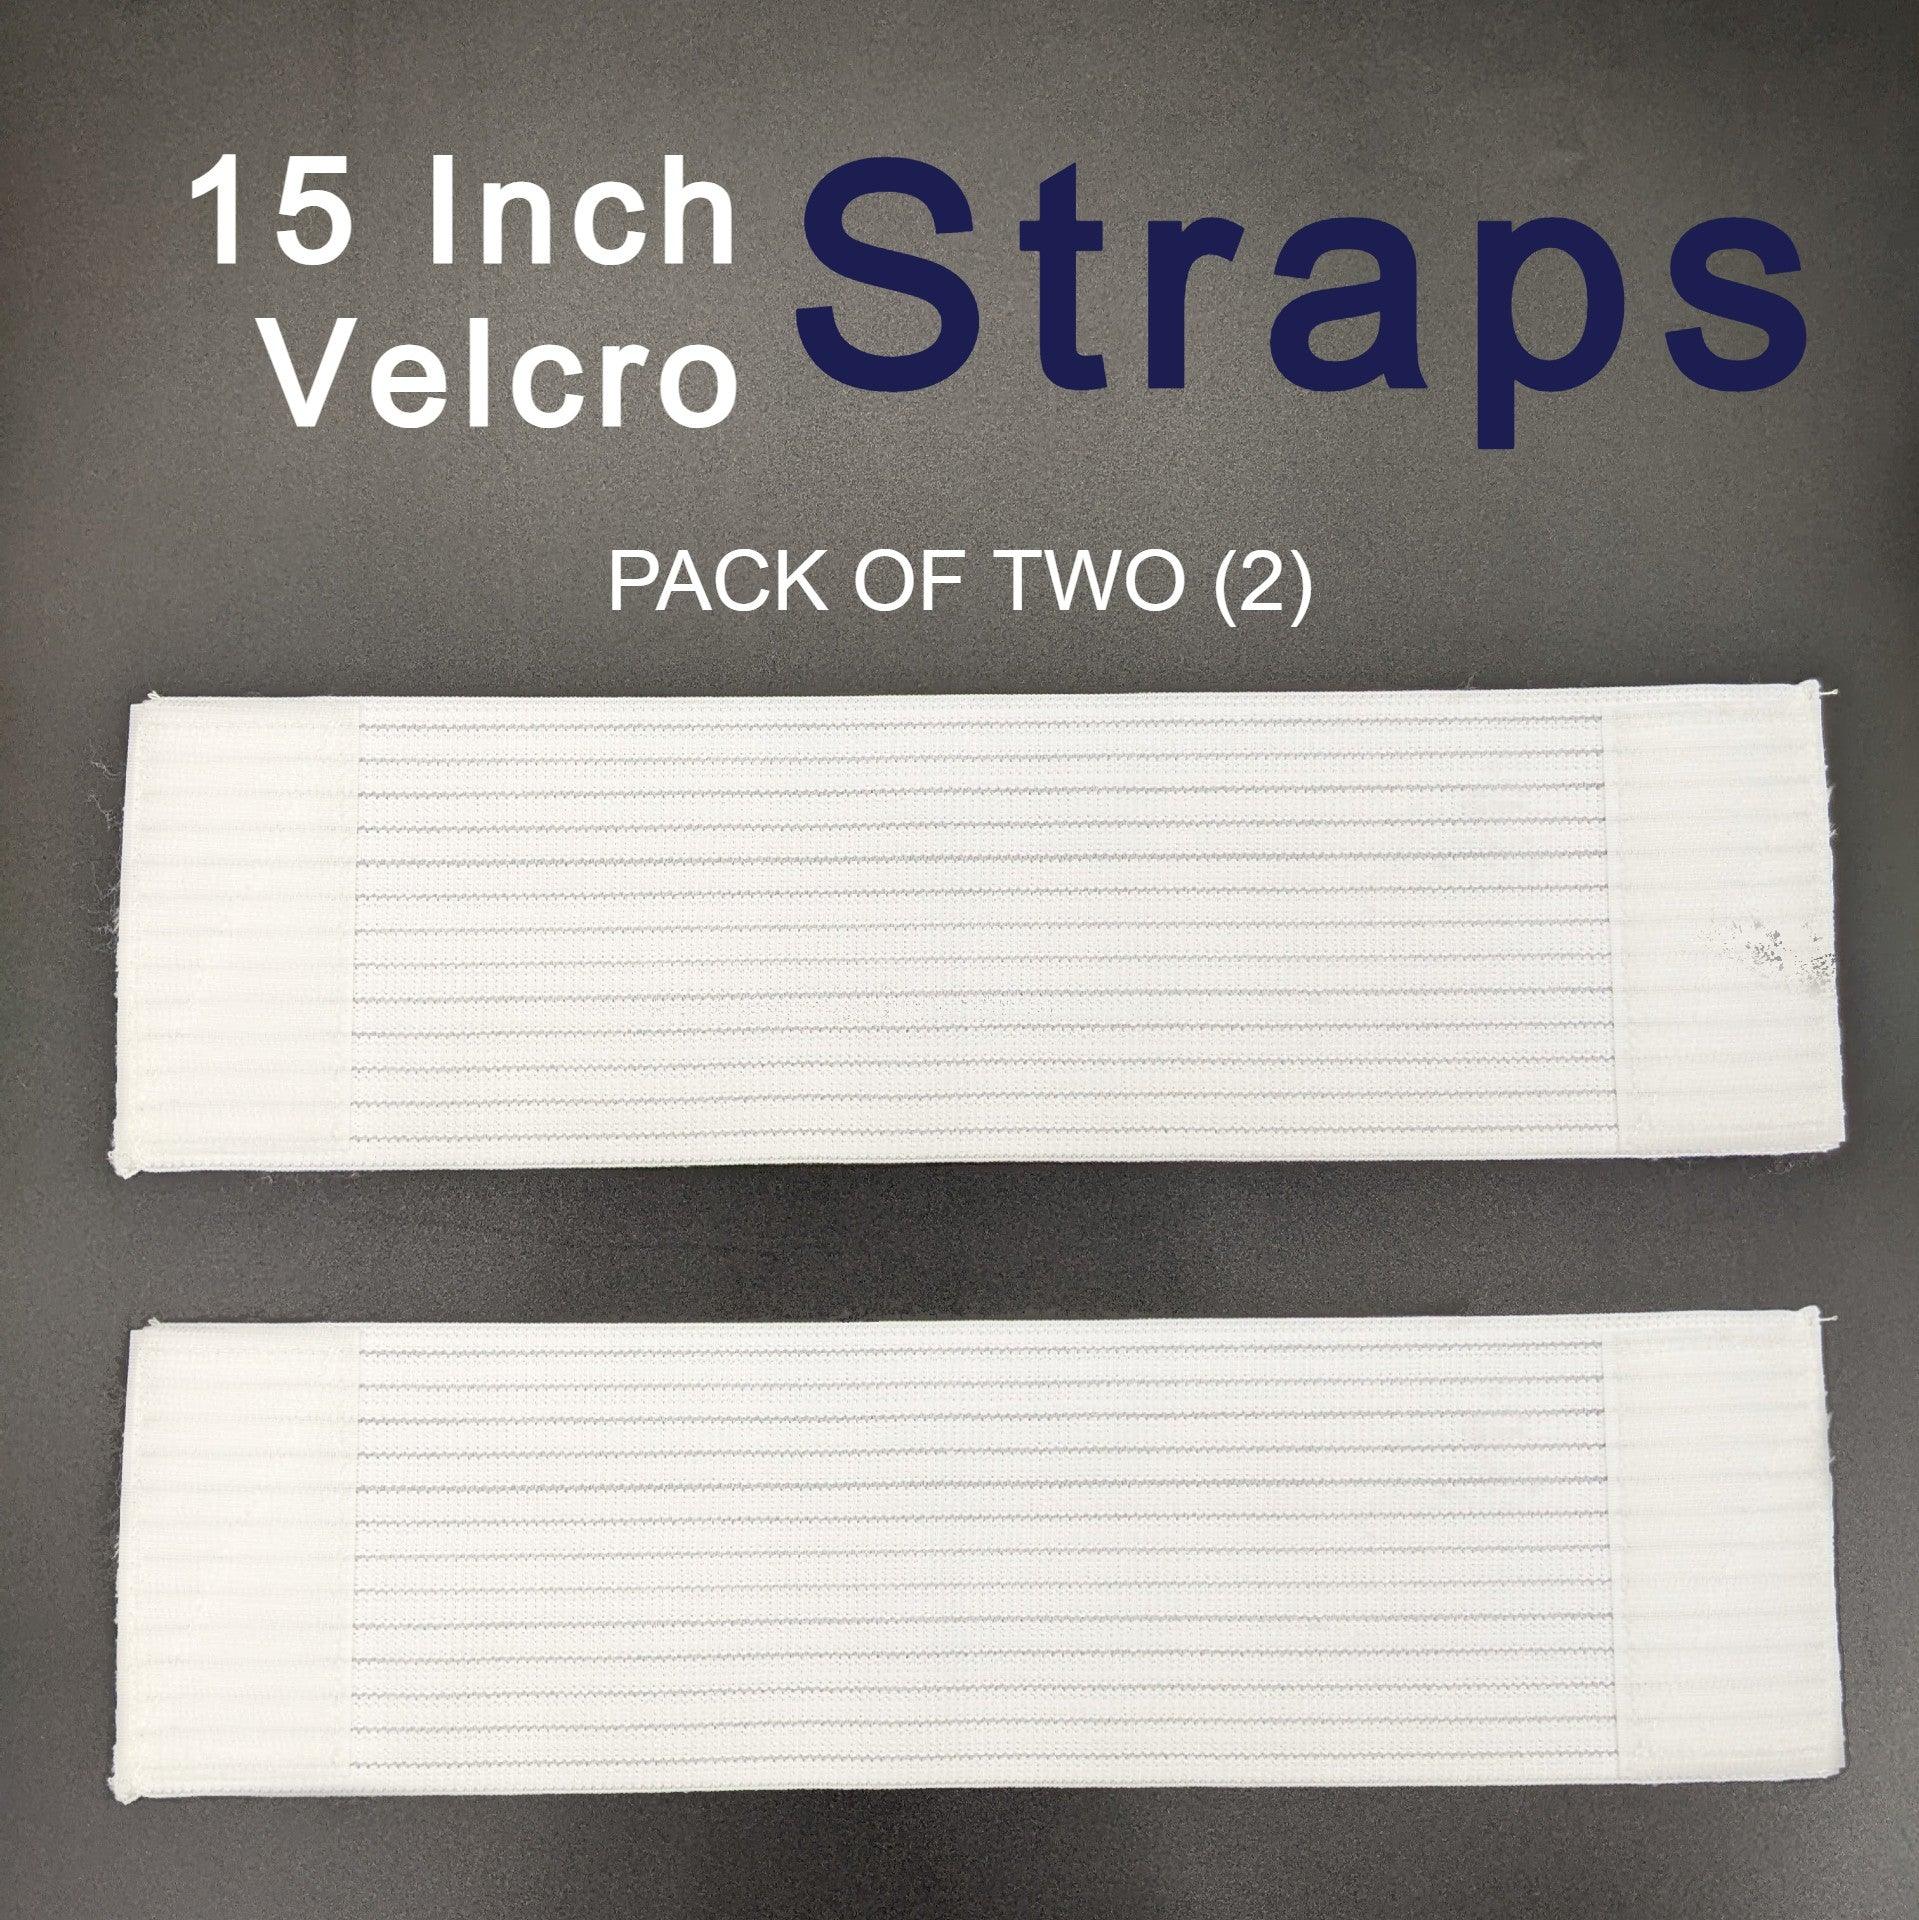 16 Dollar Special - 15-Inch Universal Cold Therapy Velcro Straps (2 Pack) - 15UNIVERSALSTRAPS 16 Dollar Special - 15-Inch Universal Cold Therapy Velcro Straps (2 Pack) - undefined by Supply Physical Therapy 